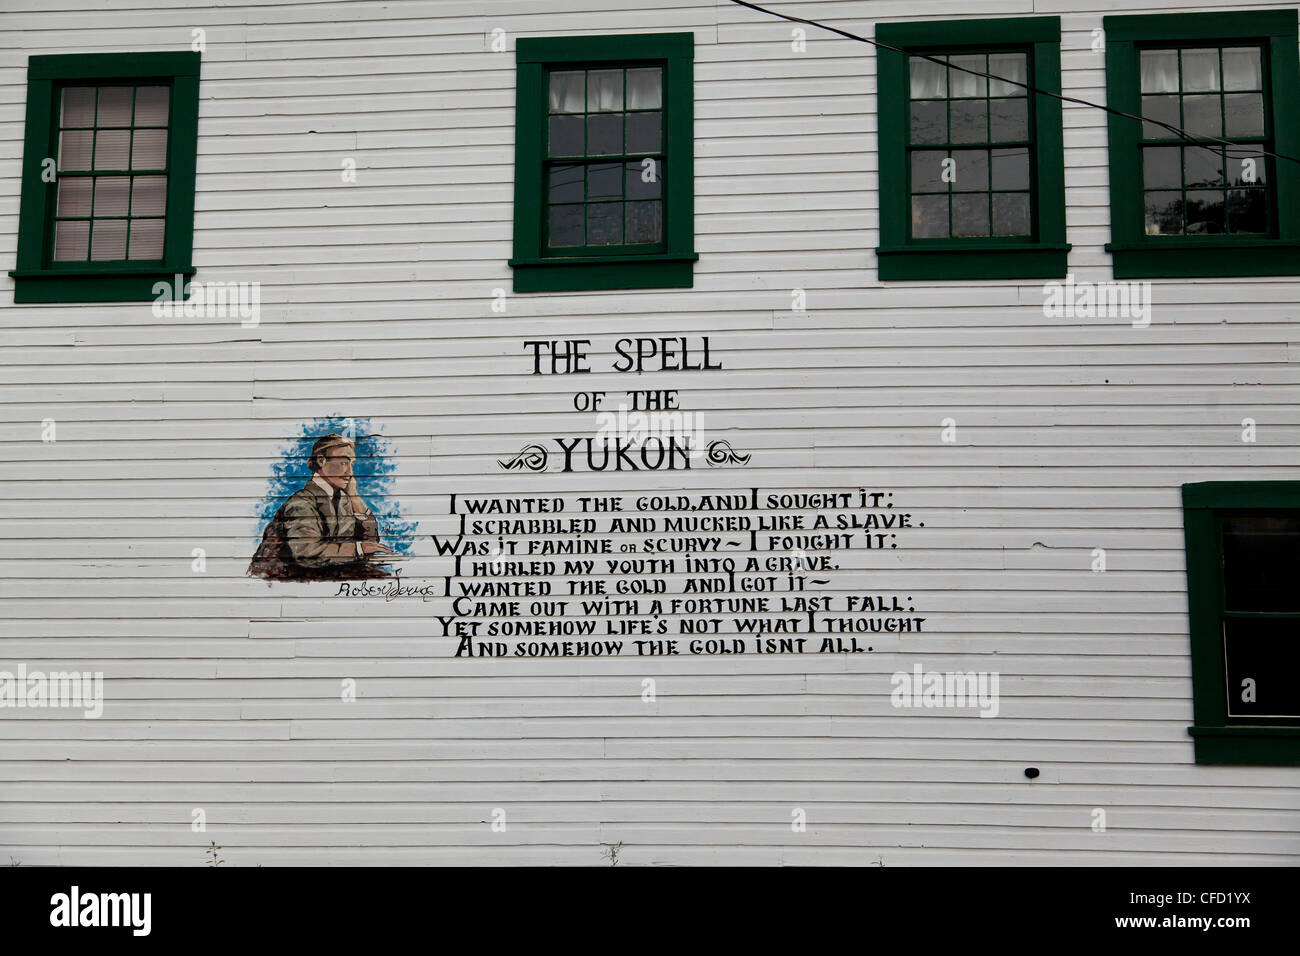 The Spell of the Yukon part of a poem by Robert Service written on the side of a building in Dawson City, Yukon, Canada Stock Photo